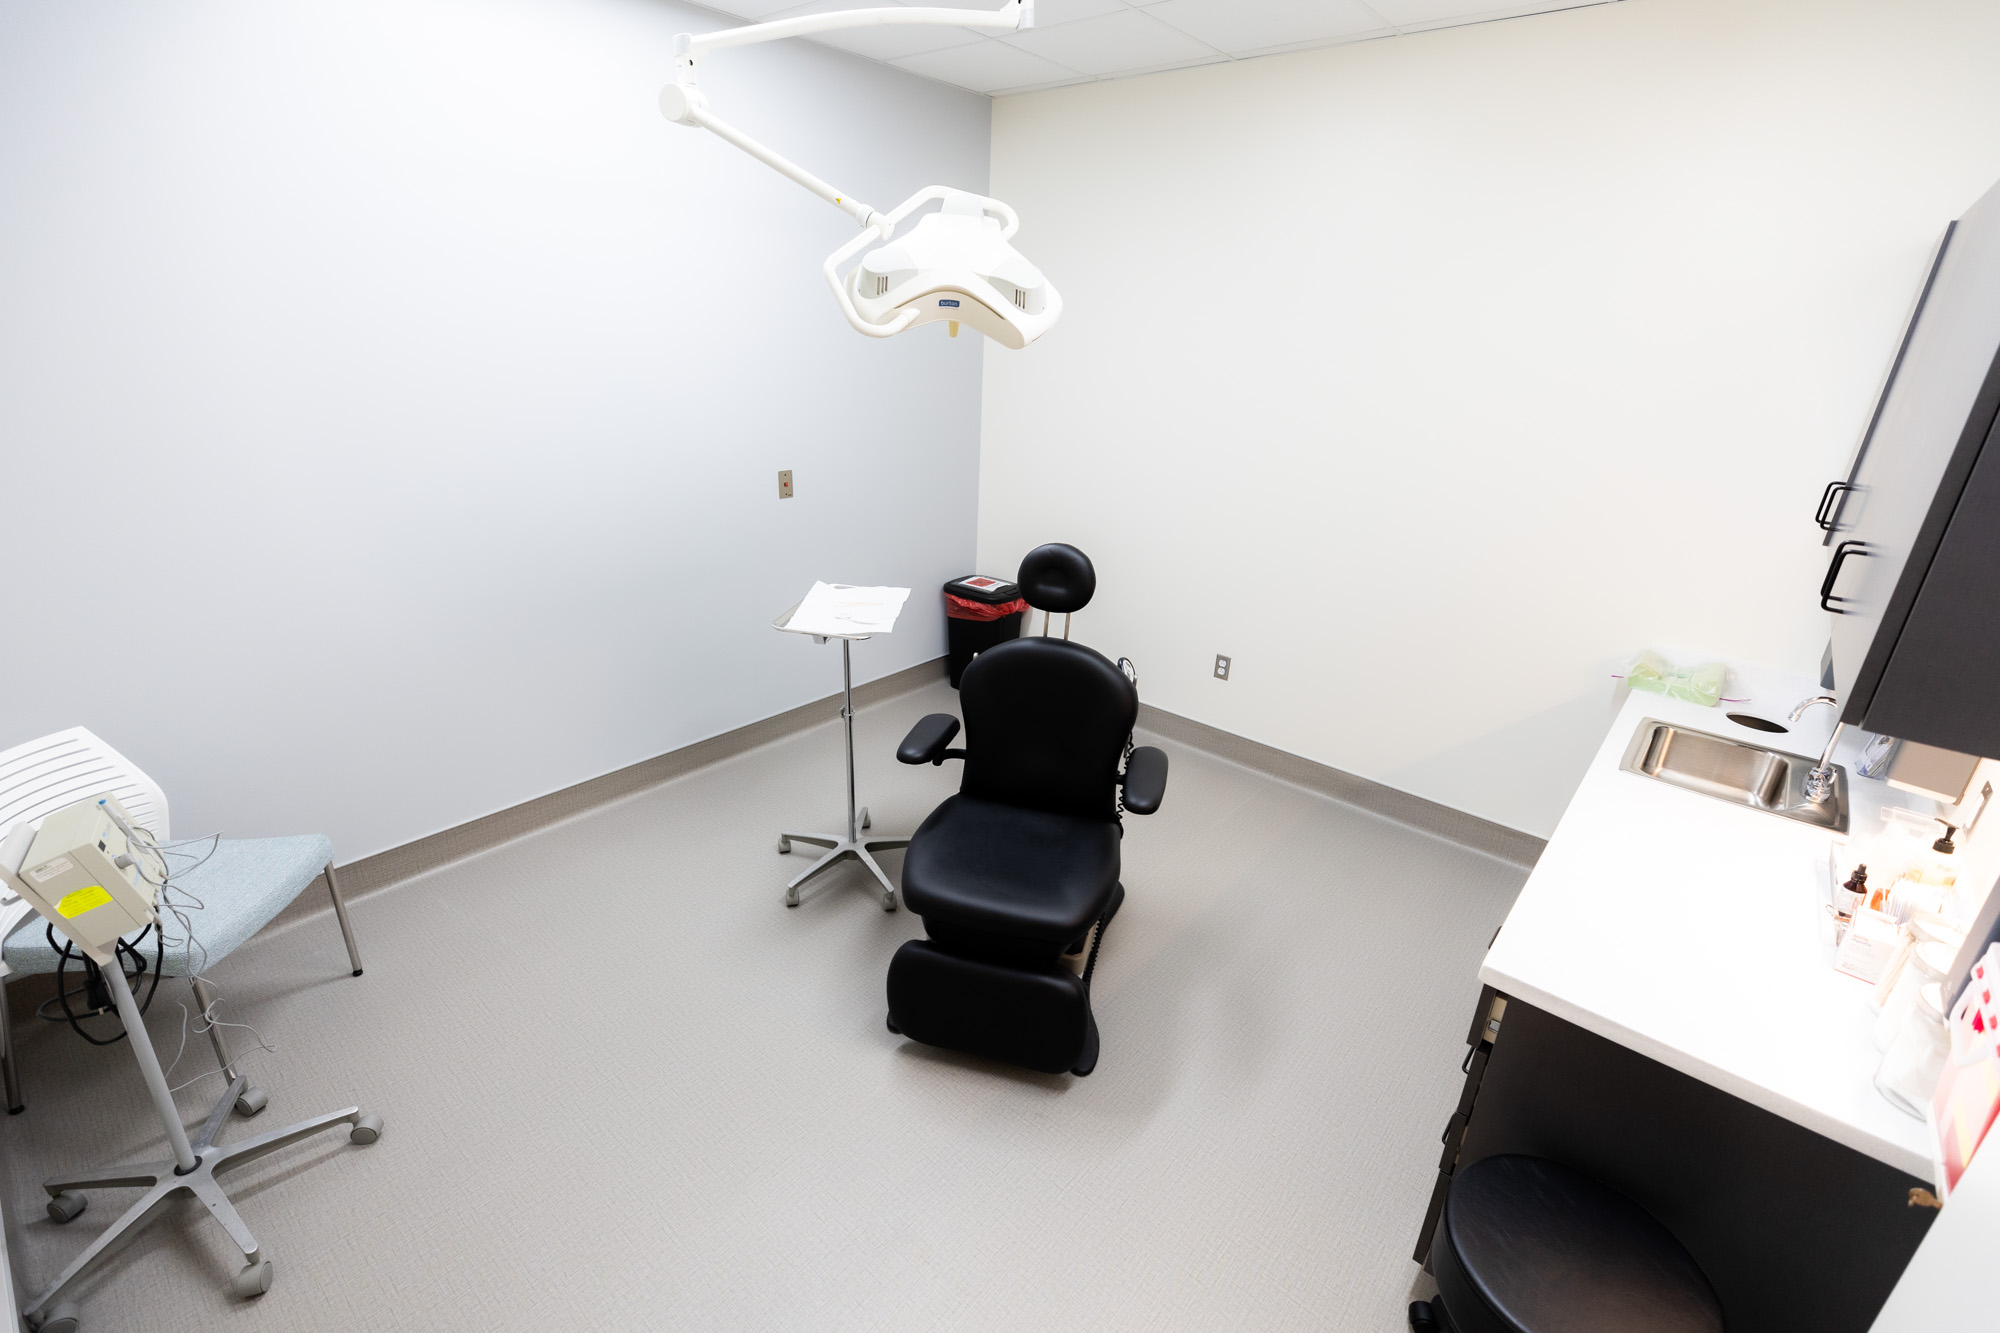 Image of a treatment room. In the middle of the room is a sleek black medical examination chair with a rolling side table next to it. There is also an overhead lighting device, similar to what is at a dentist's office. In one corner is an extra chair and then a rolling machine with several wires coming out of it. On the other wall is a countertop with a sink and cabinets up above it.